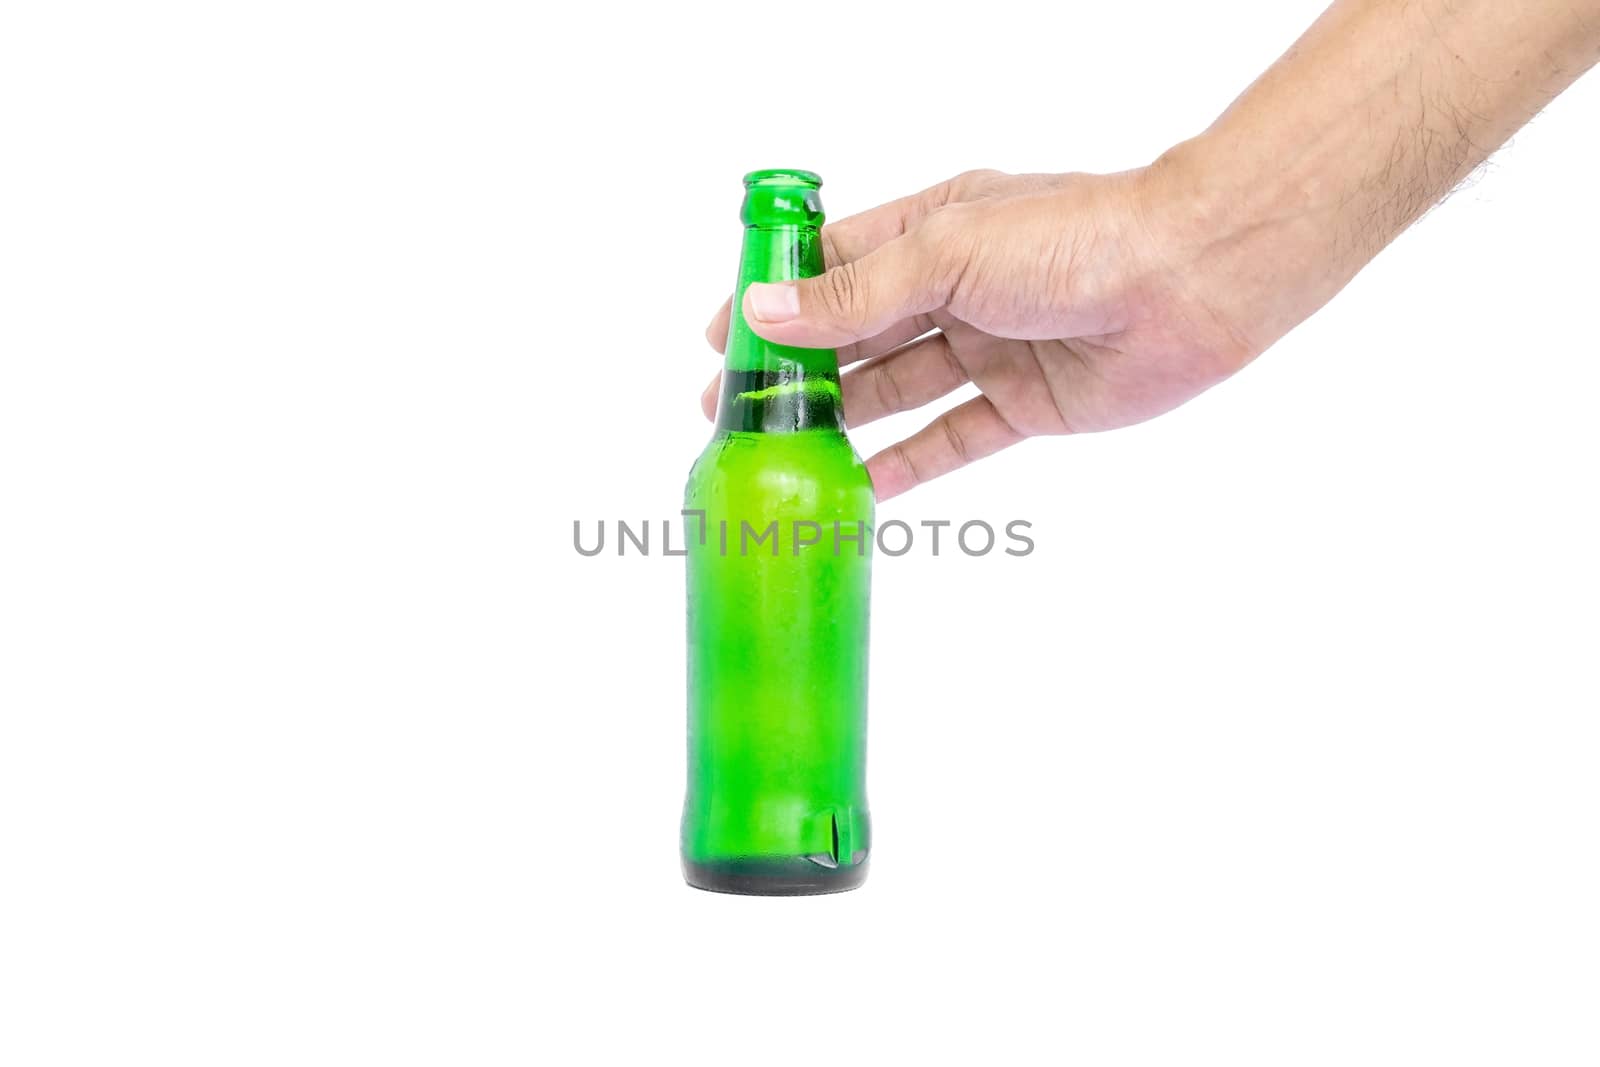 Hand holding the glass bottles for beer, alcohol or other beverage industry isolated on white background.